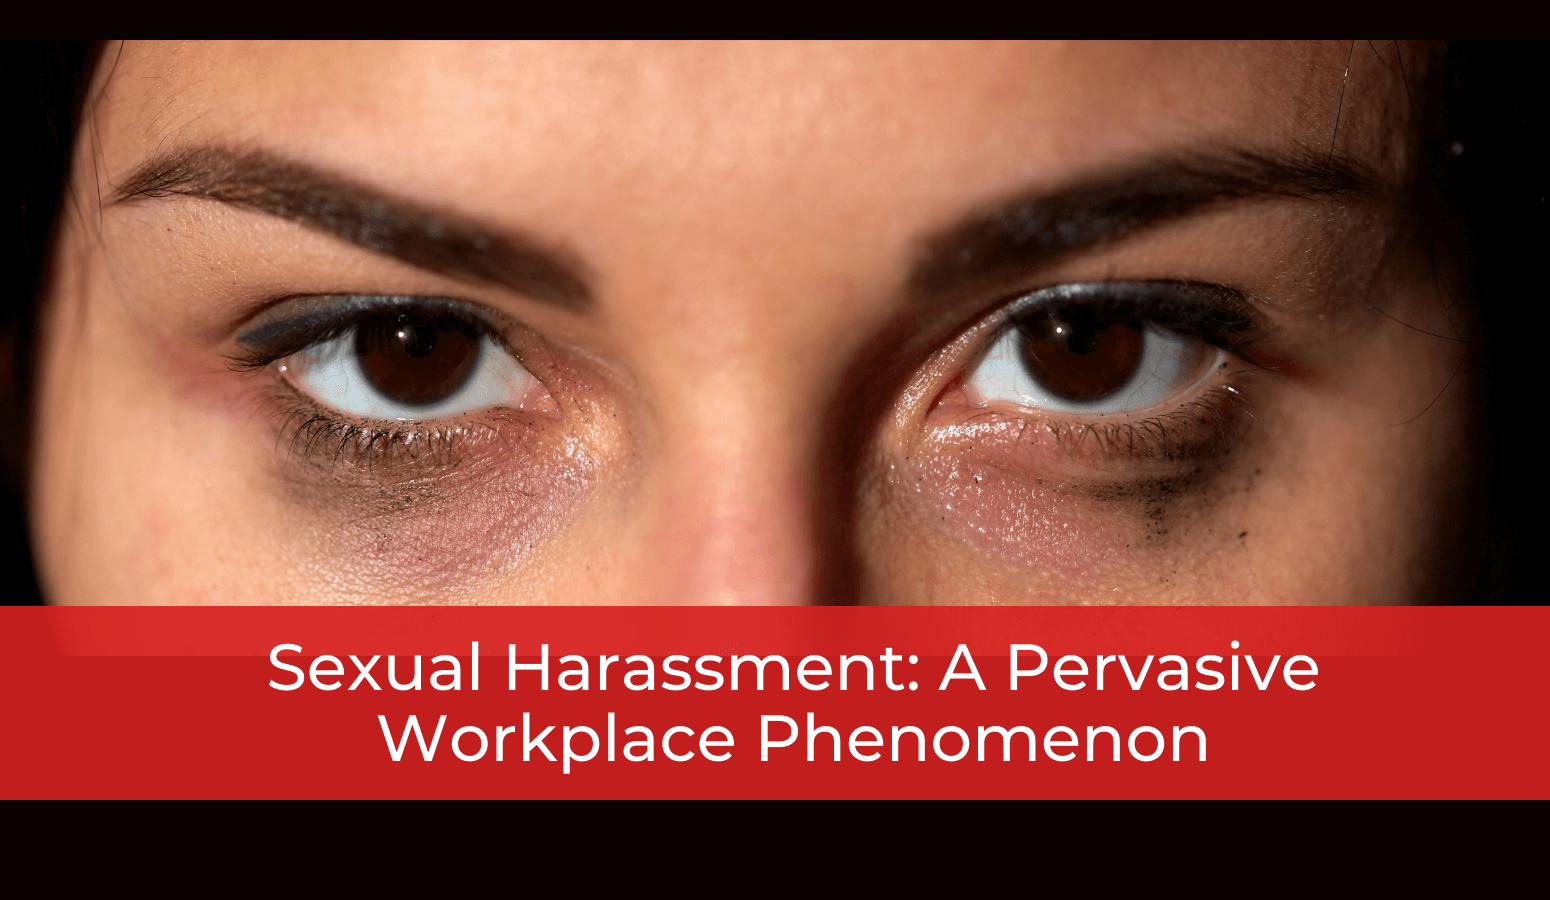 Featured image for “Sexual Harassment: A Pervasive Workplace Phenomenon”